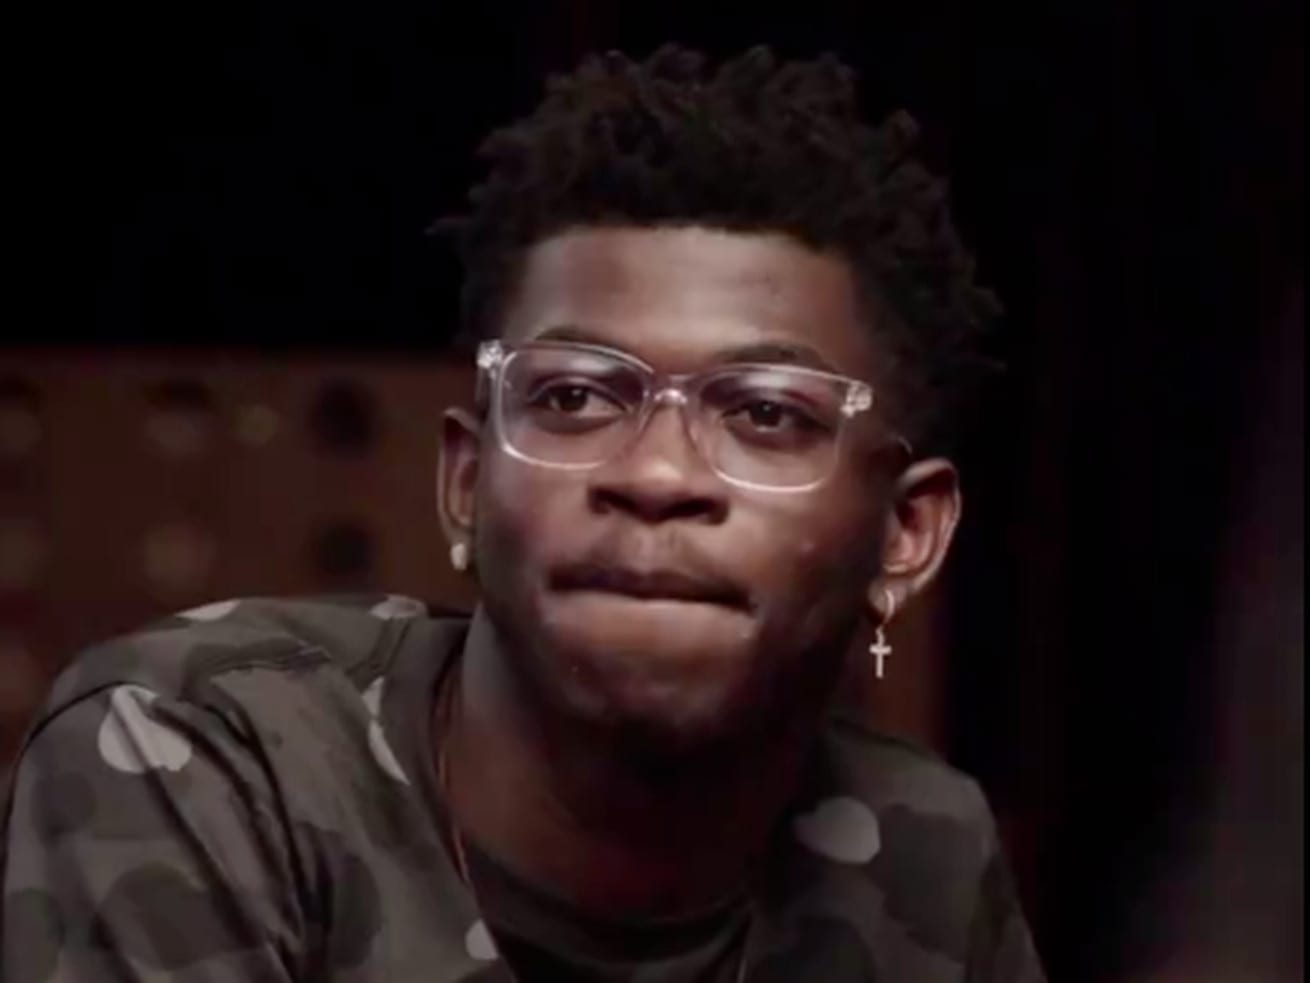 Lil Nas X tried to explain why he came out as gay. Kevin Hart: “So what?”